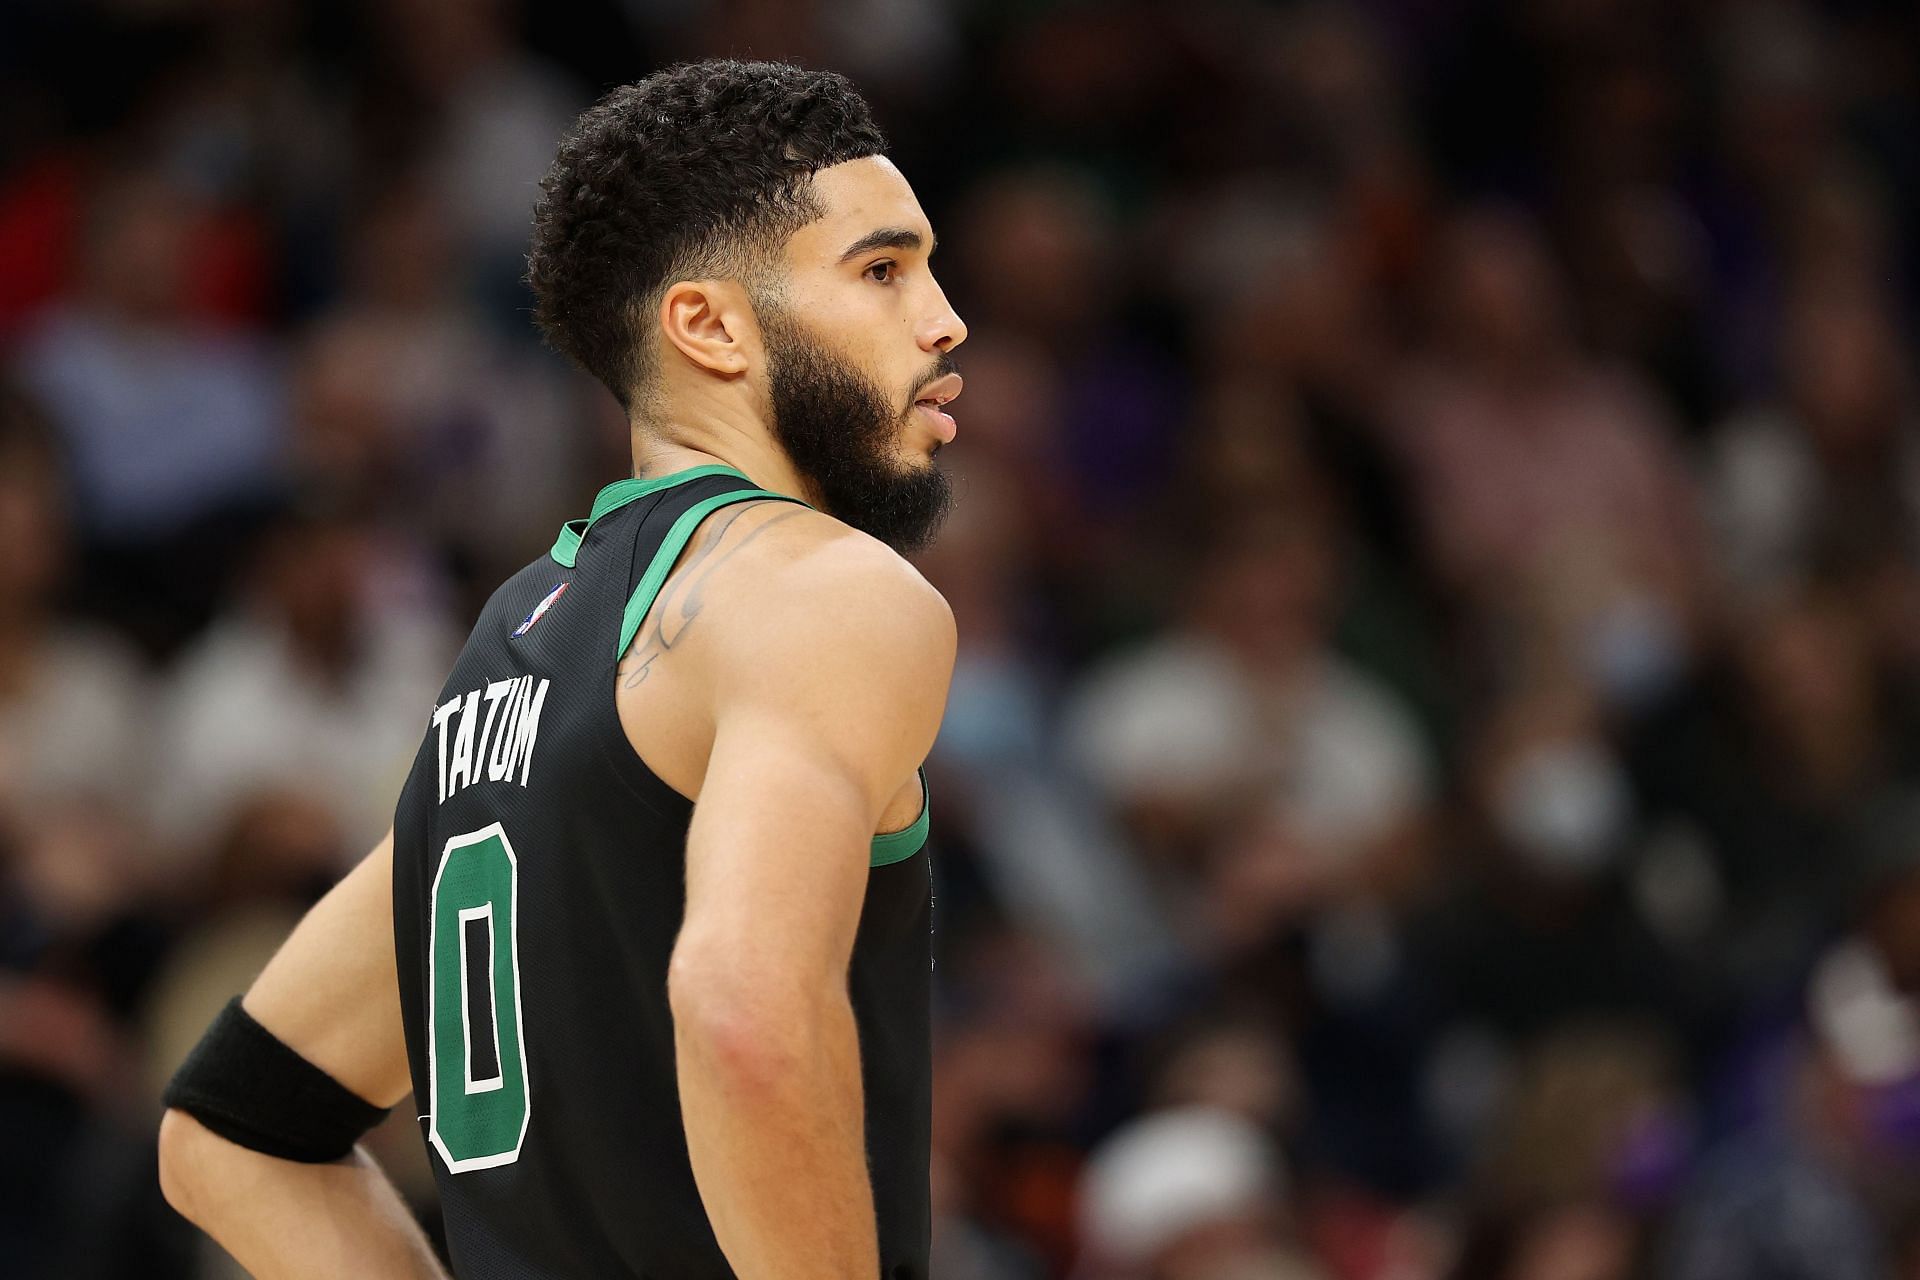 Jayson Tatum #0 of the Boston Celtics reacts during the first half of the NBA game against the Phoenix Suns at Footprint Center on December 10, 2021, in Phoenix, Arizona.